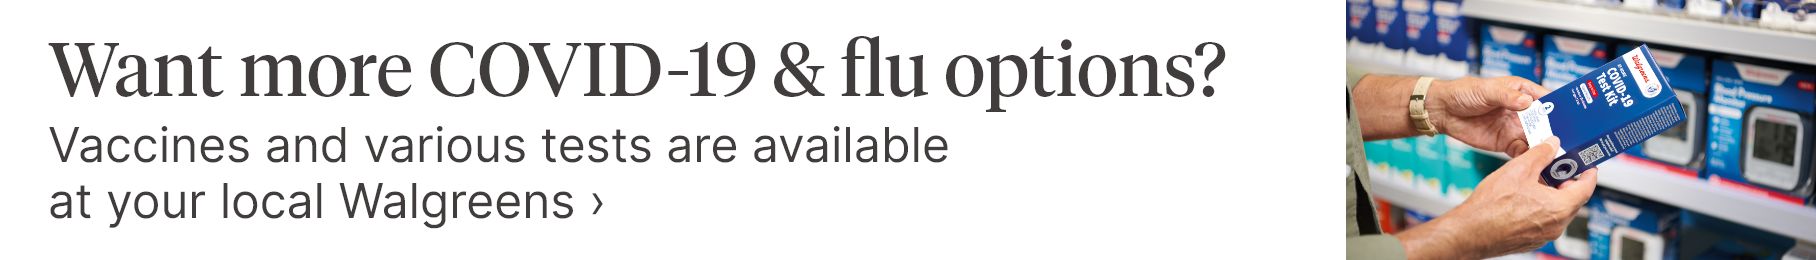 Want more COVID-19 & flu options? Vaccines and various tests are available at your local Walgreens.